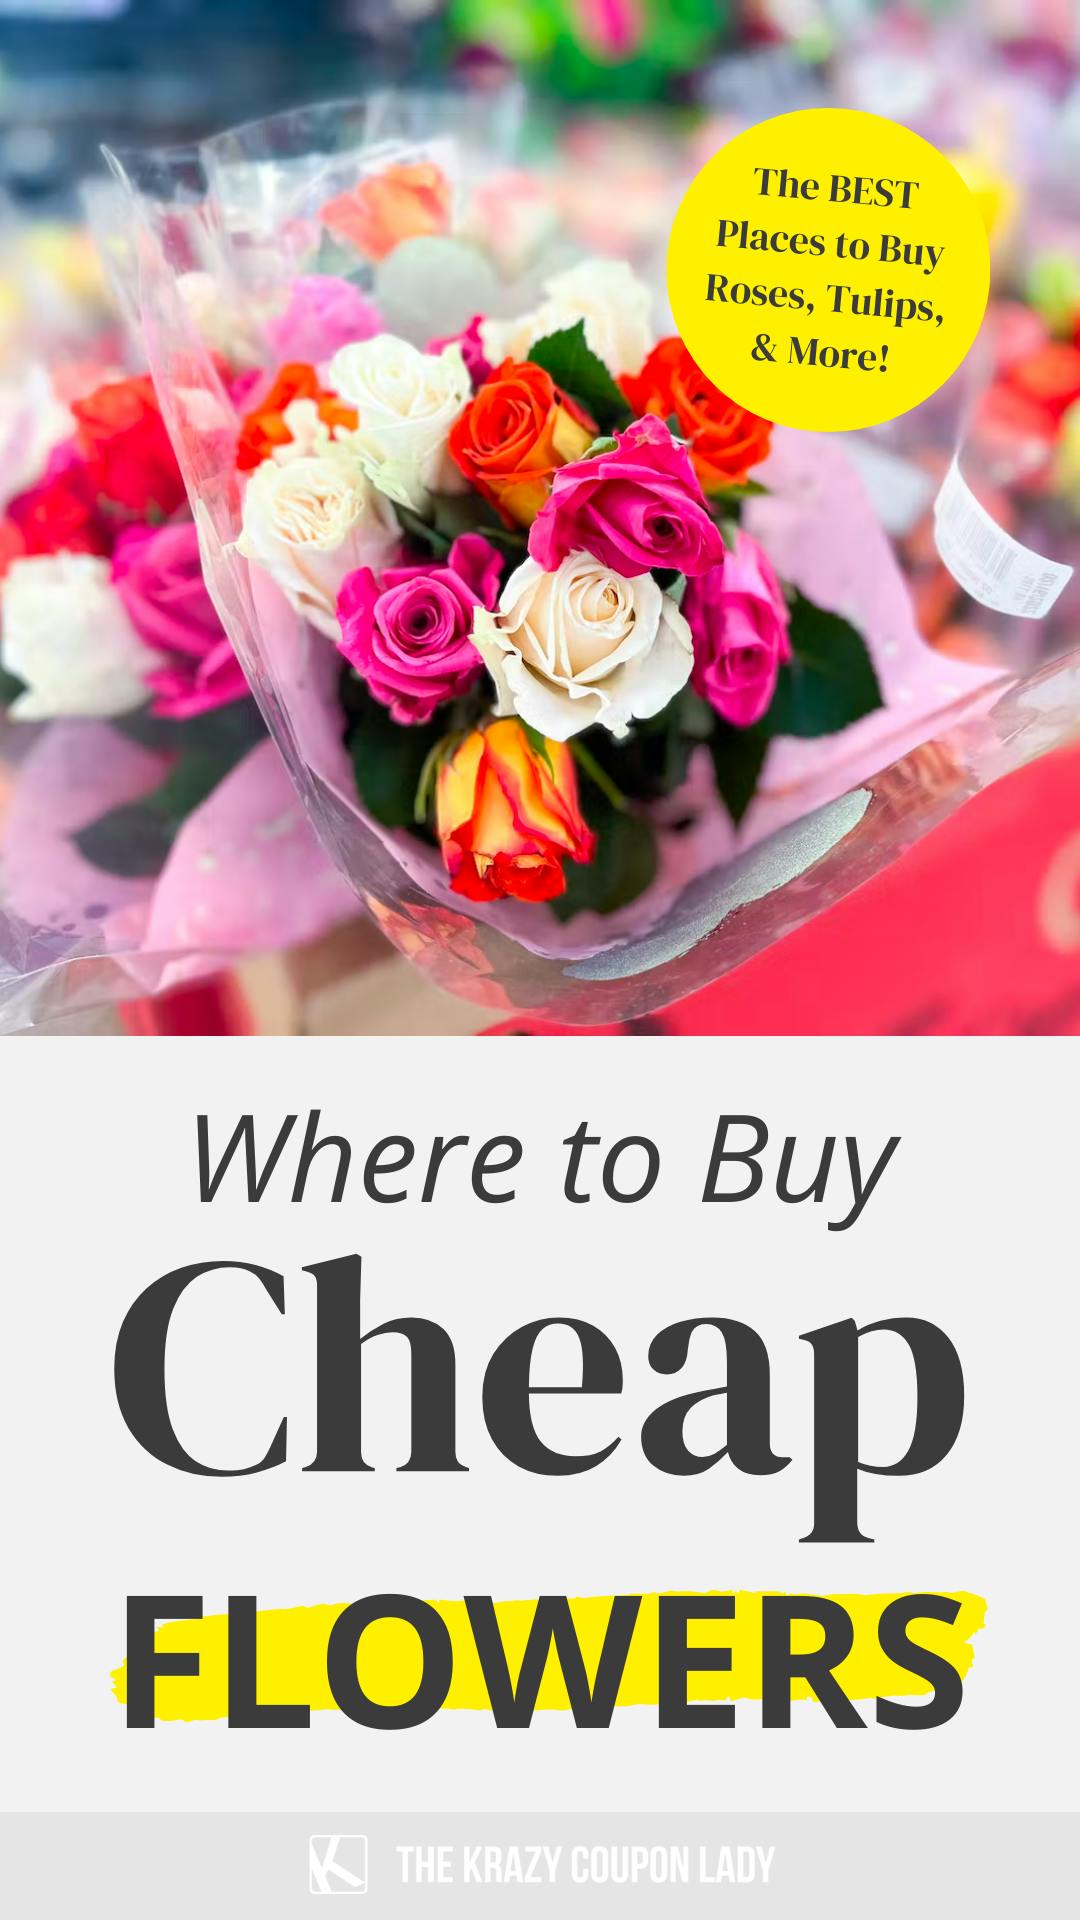 Where to Buy Cheap Flowers: Starting at $0.79 per Rose